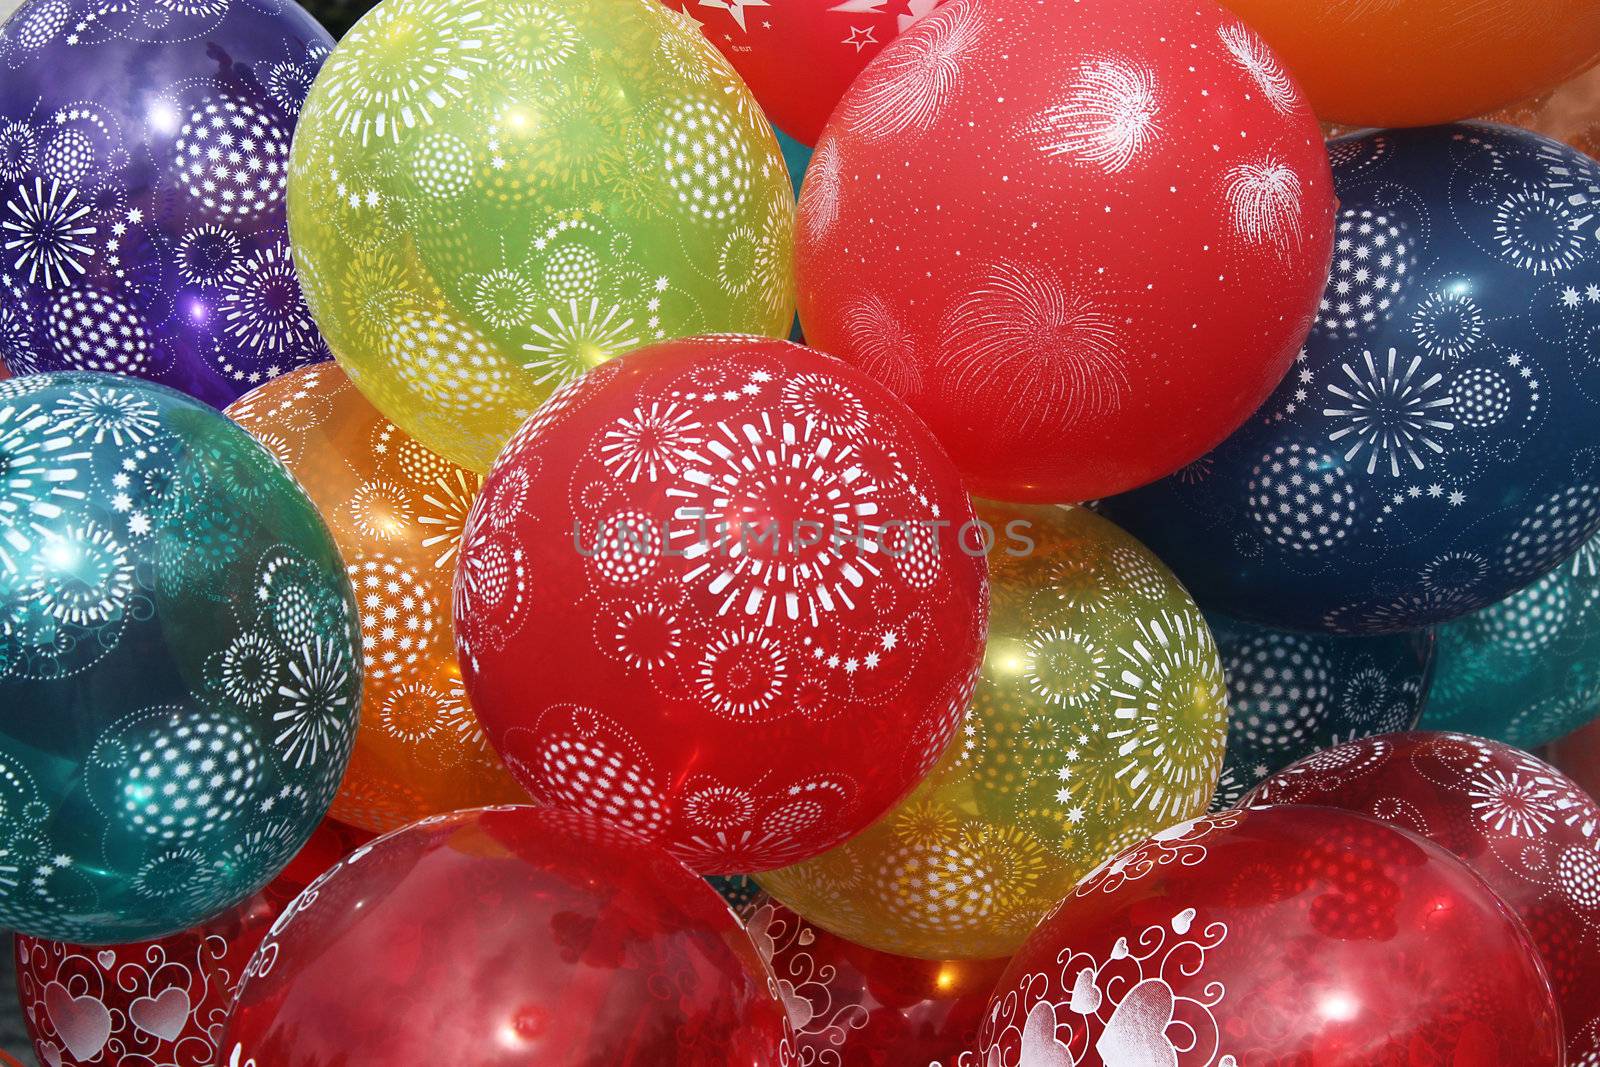 We see many colorful balloons with ornaments